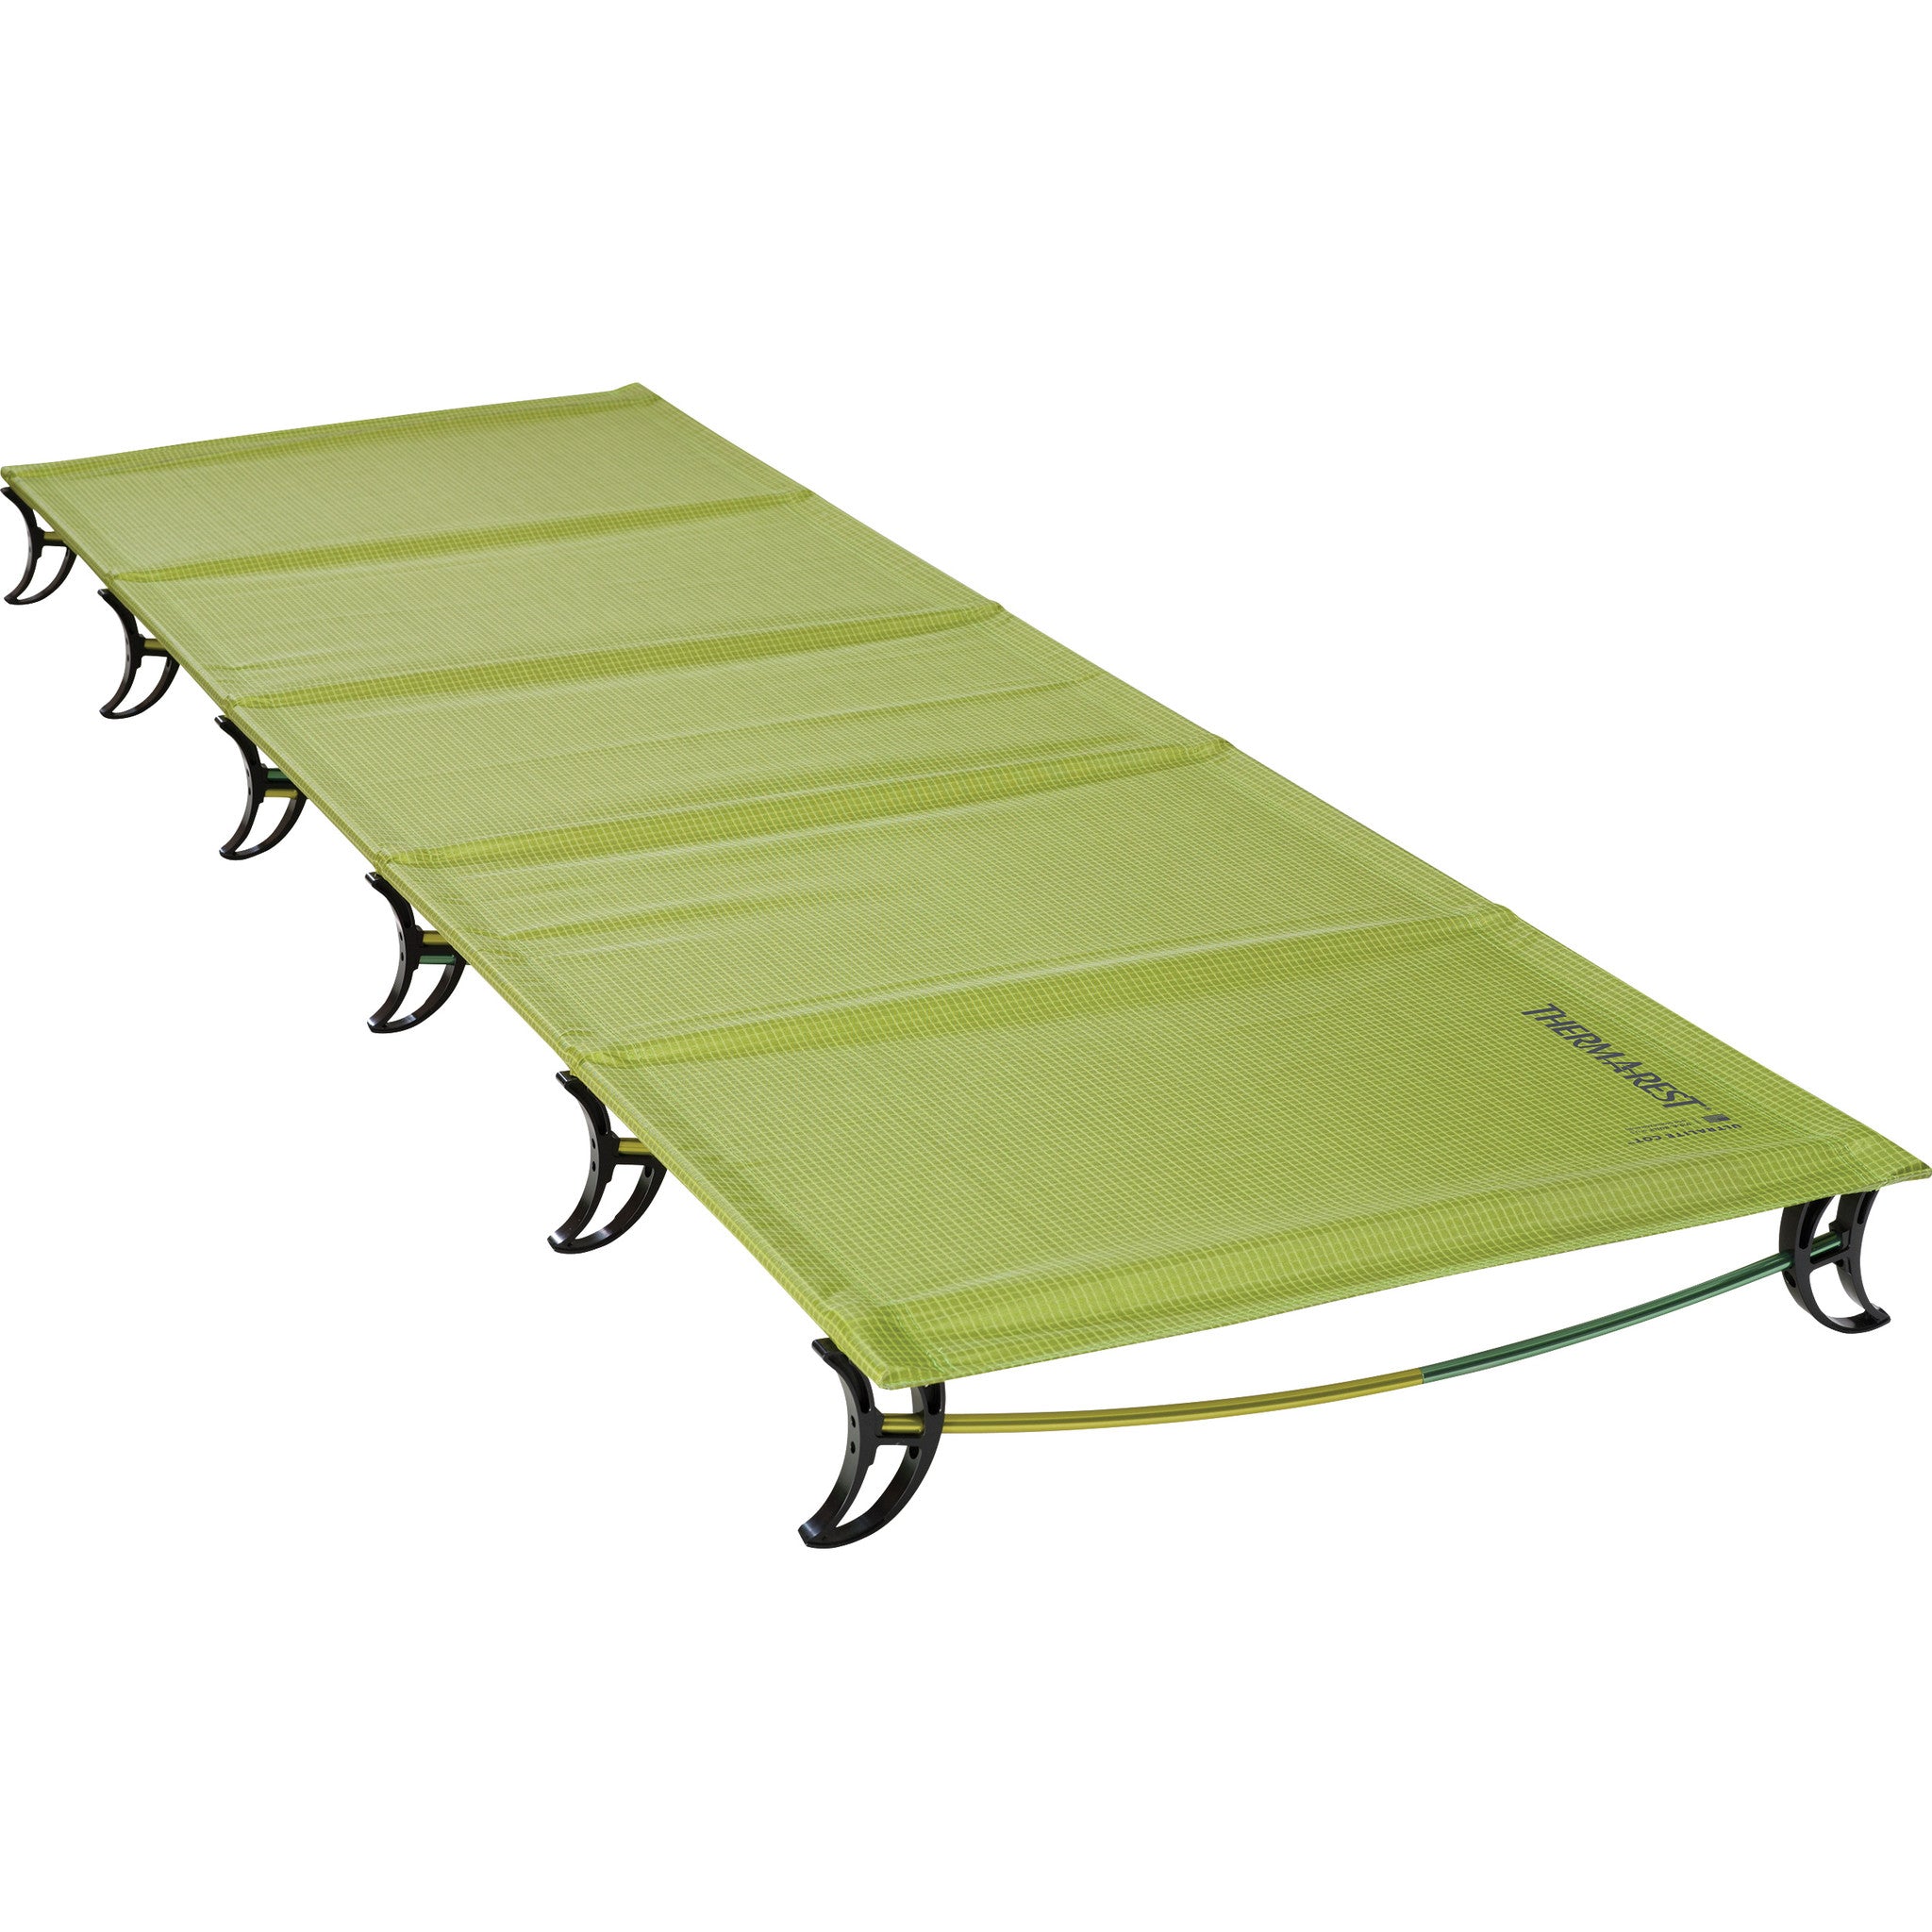 Thermarest - UltraLite Cot